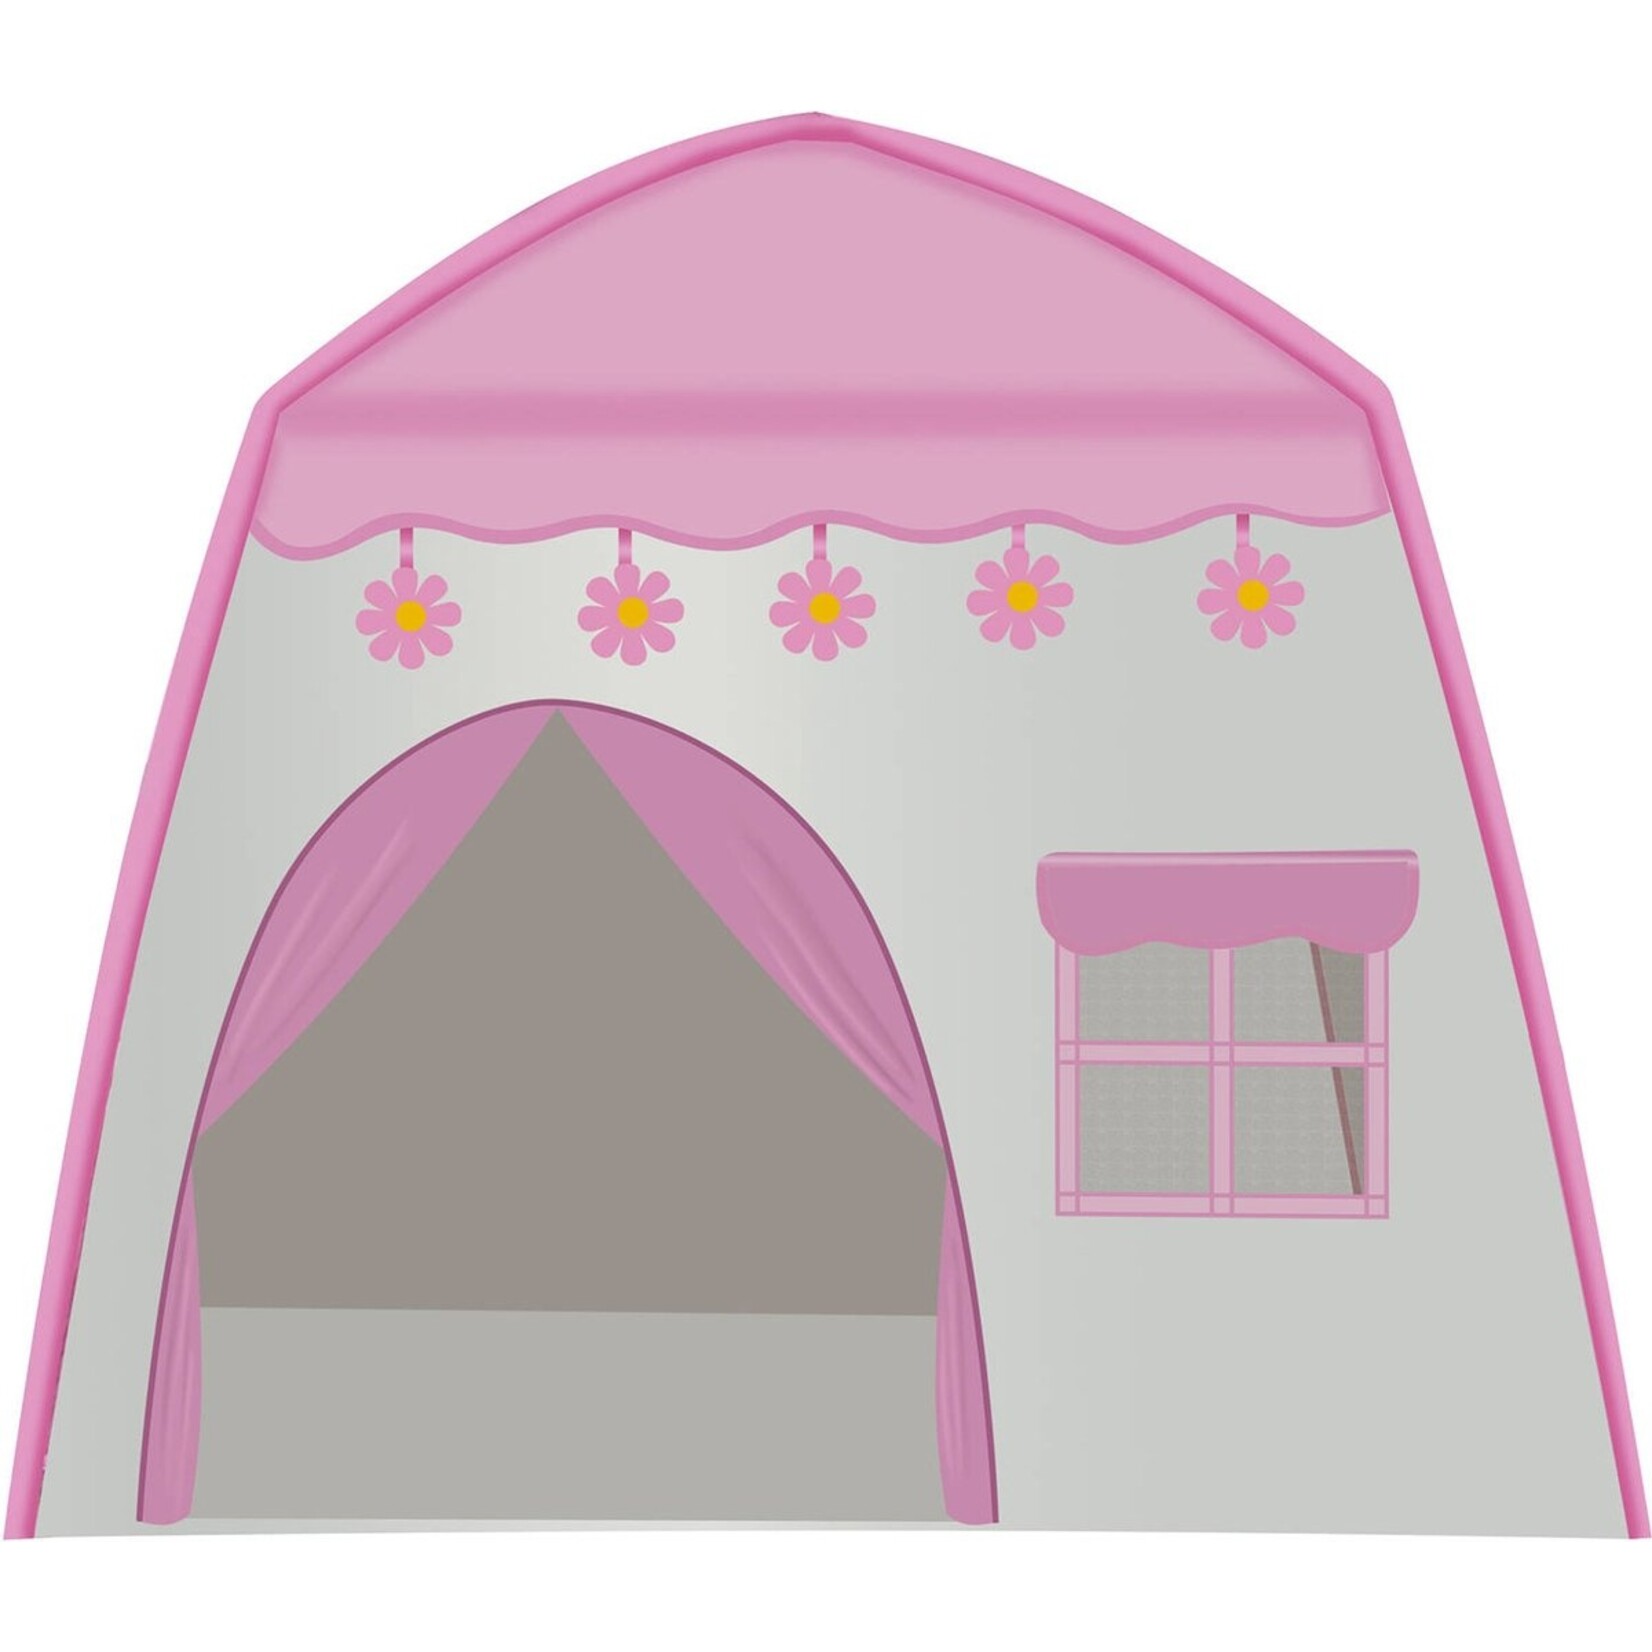 Parya Parya Home - Play Tent XL - With LED Lights - Pink Tent - For Children